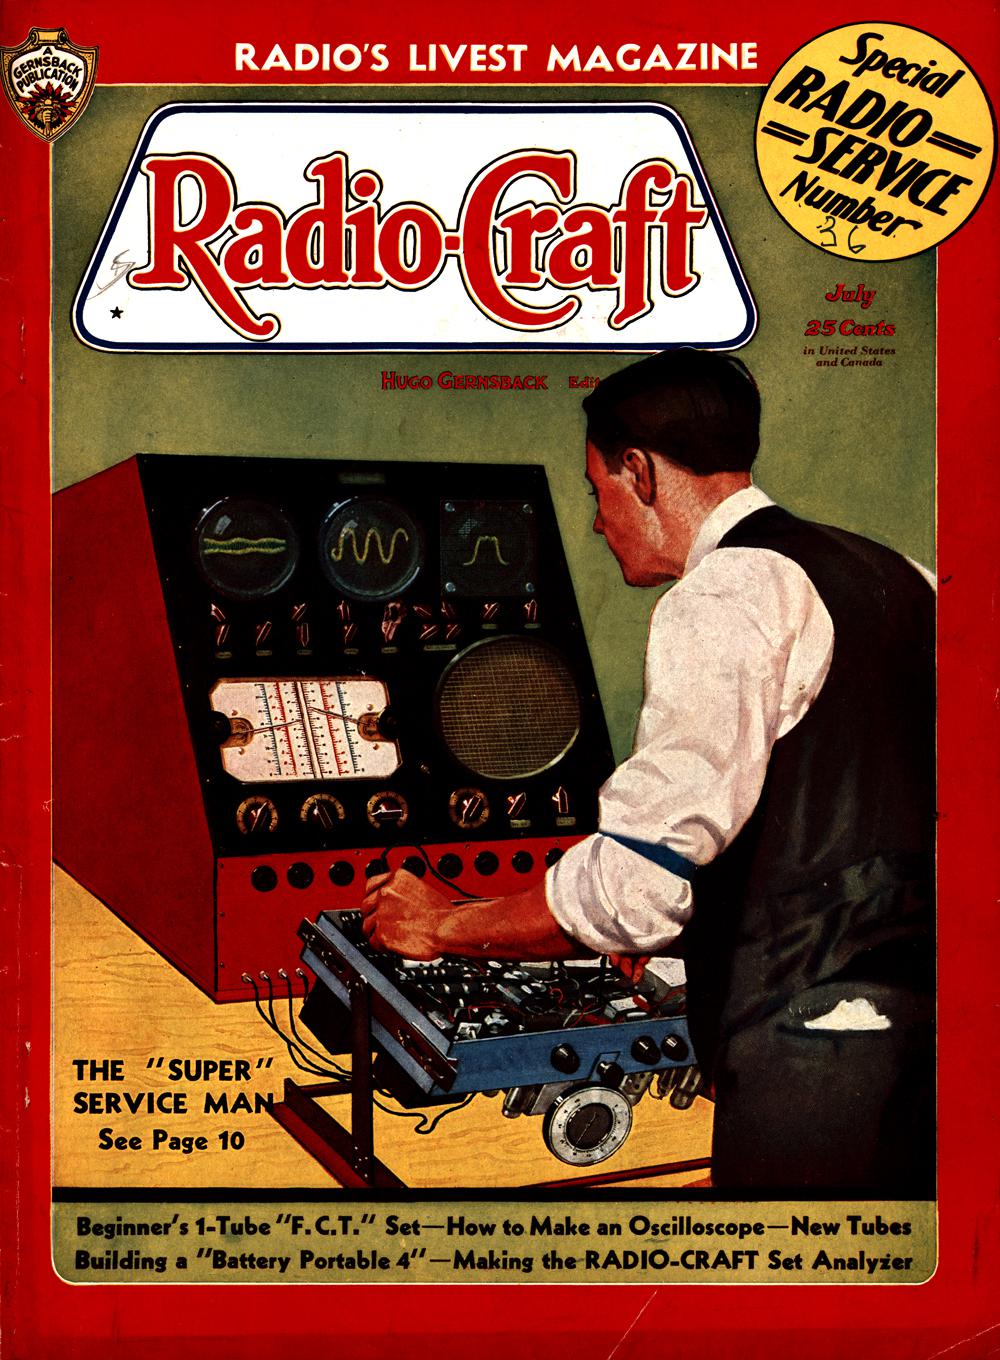 1936 - Radio-craft. and popular electronics; radio-electronics in all its phases - Vol. 8, No. 1